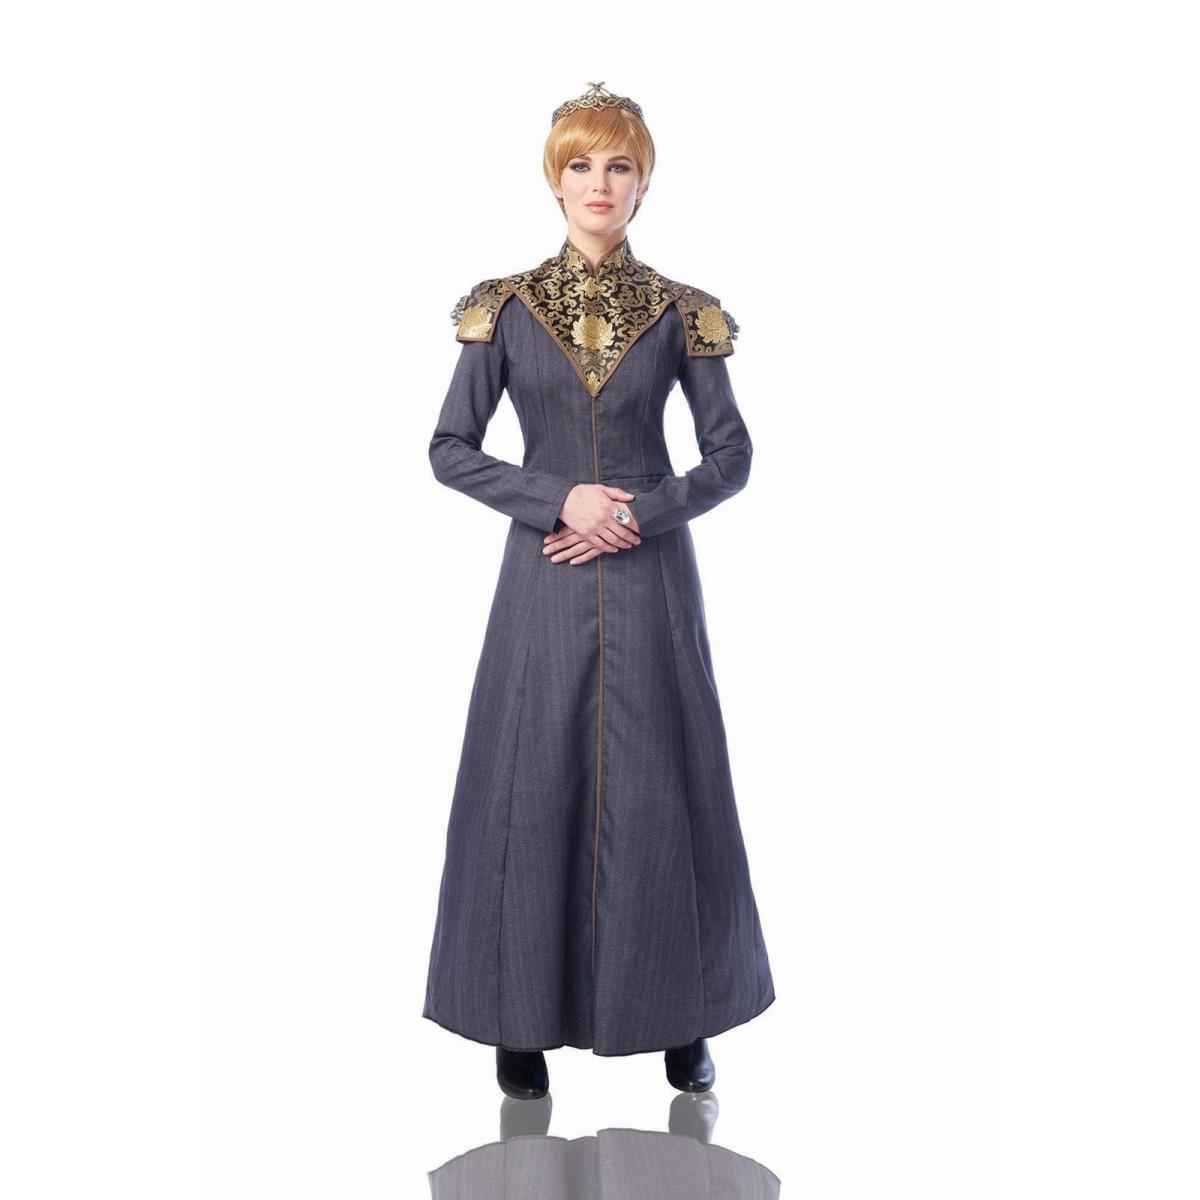 403683 Womens Queen Of Kingdoms Costume - Small